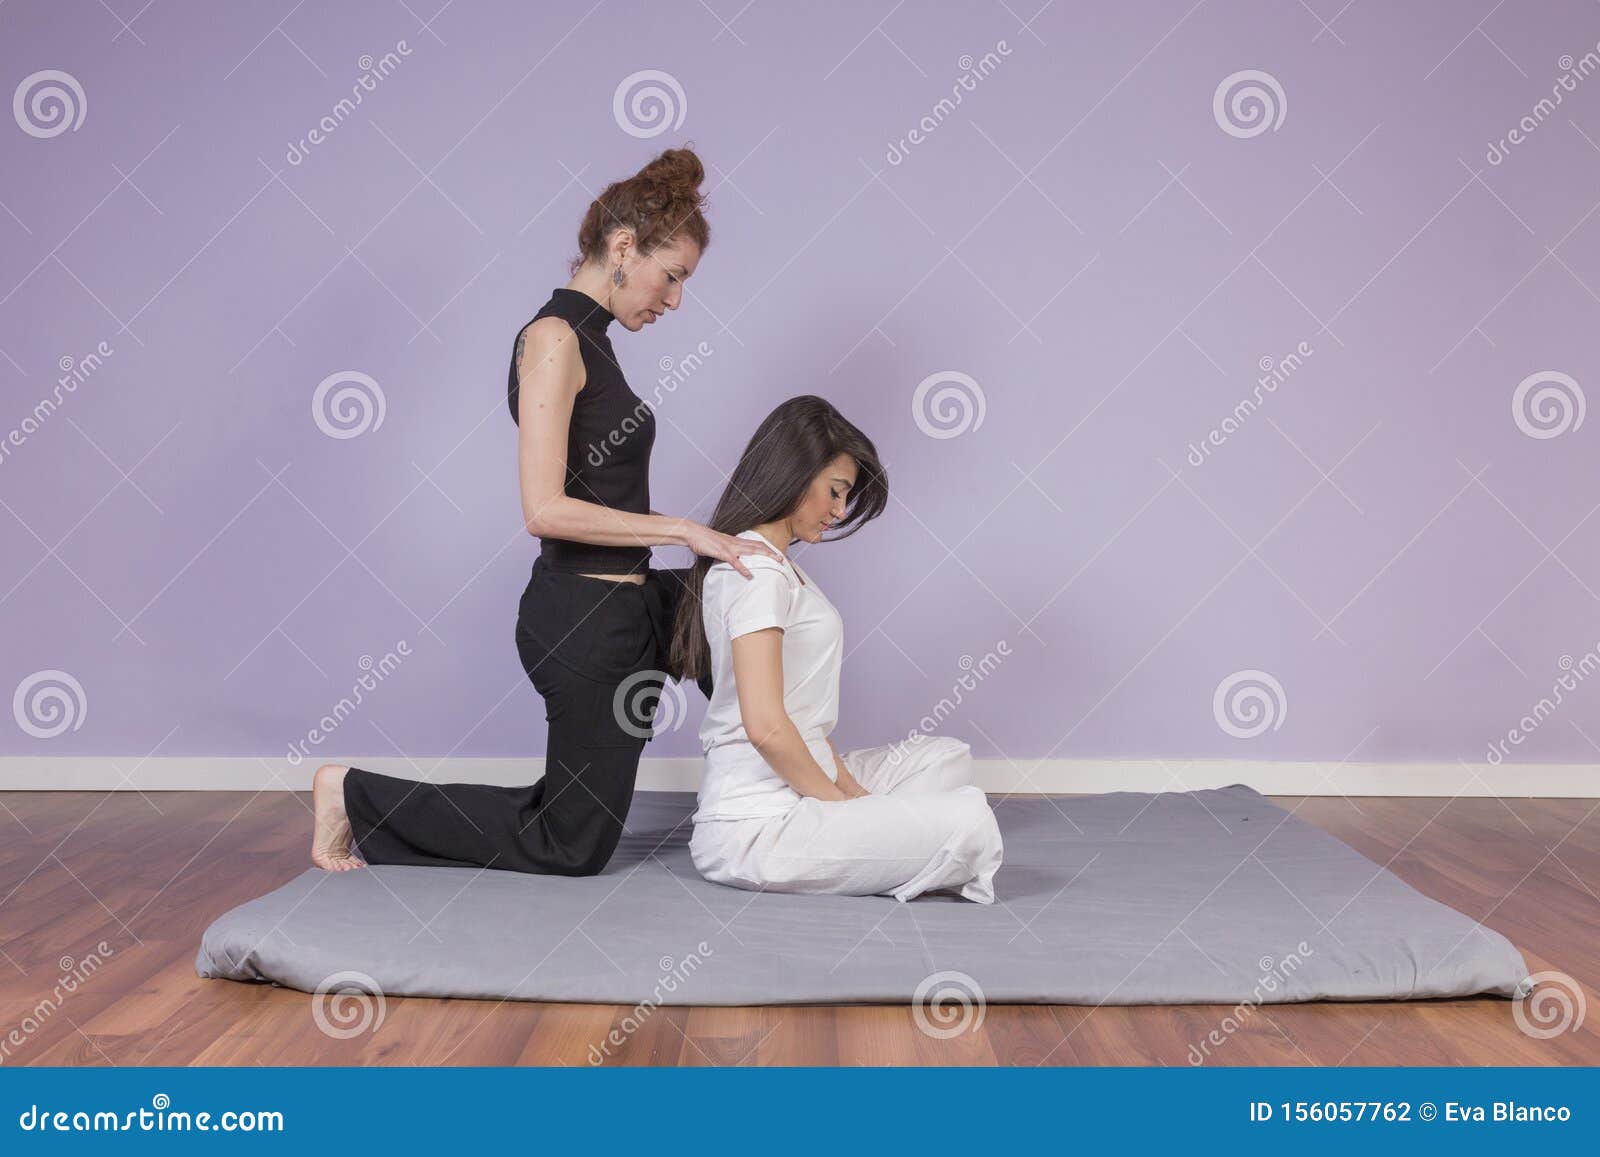 Young Woman Lying While Enjoying Stretching And The Acupressure